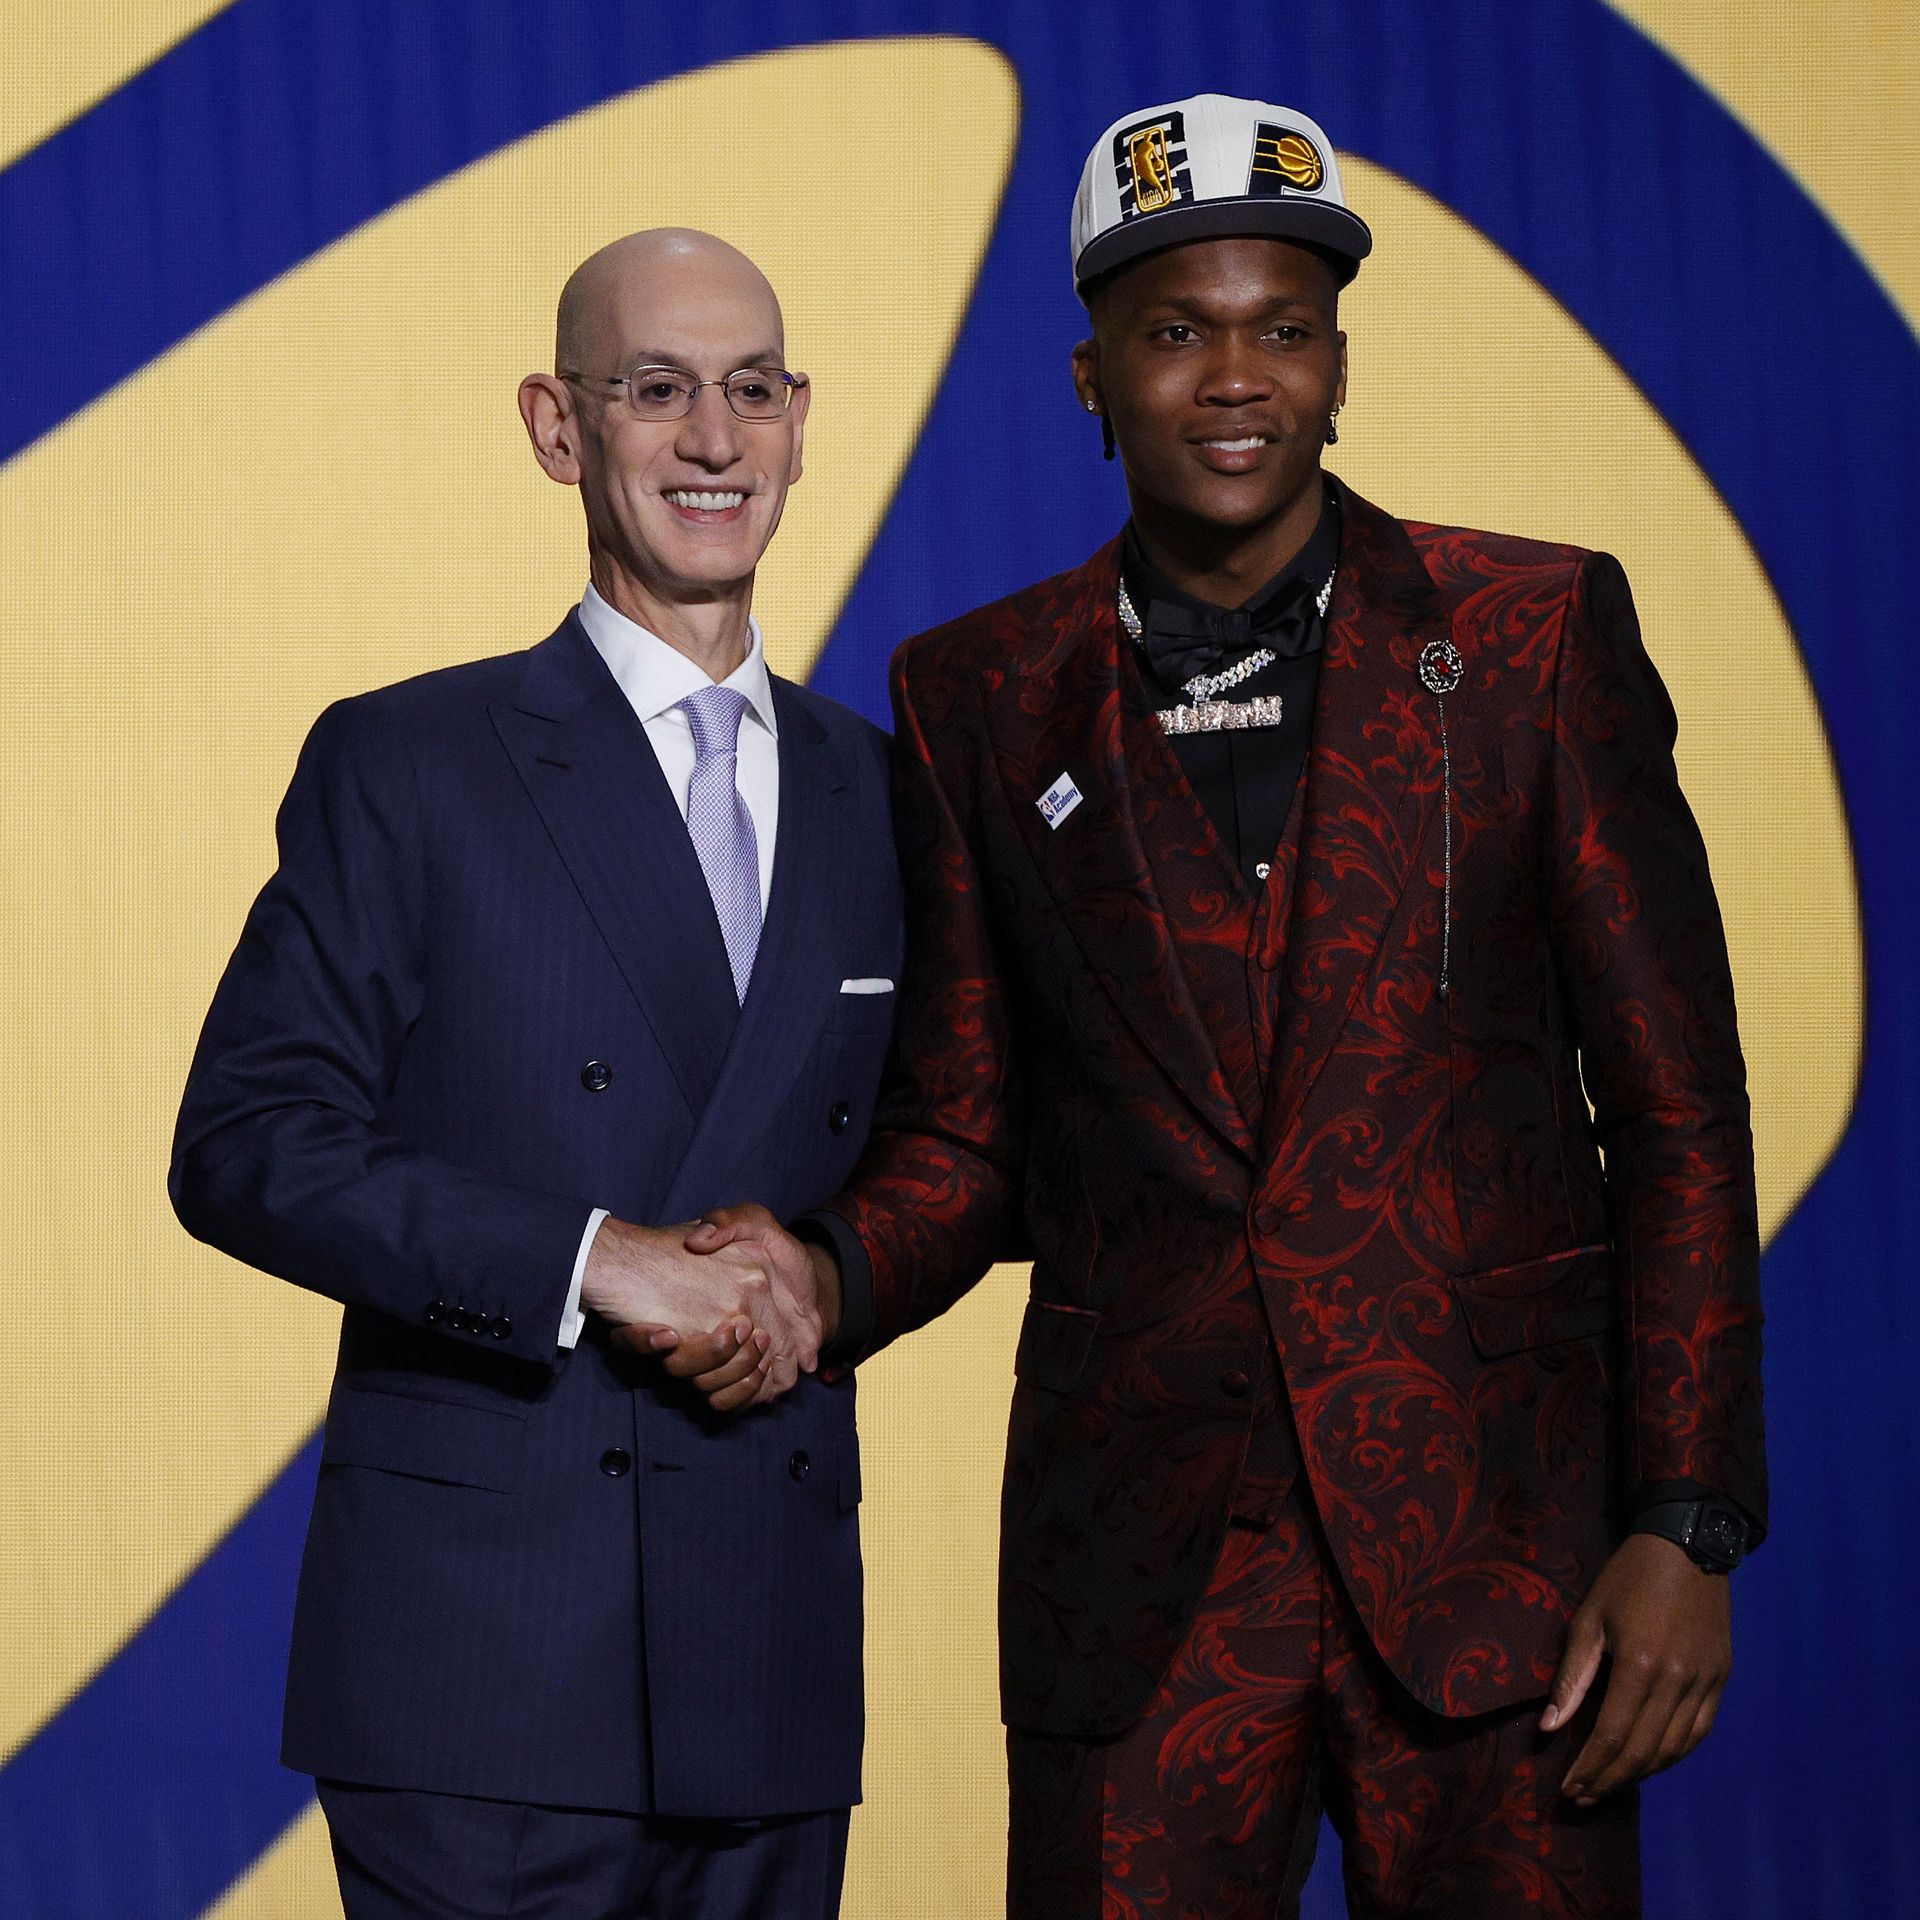 NBA commissioner shaking hands with a player during the draft.